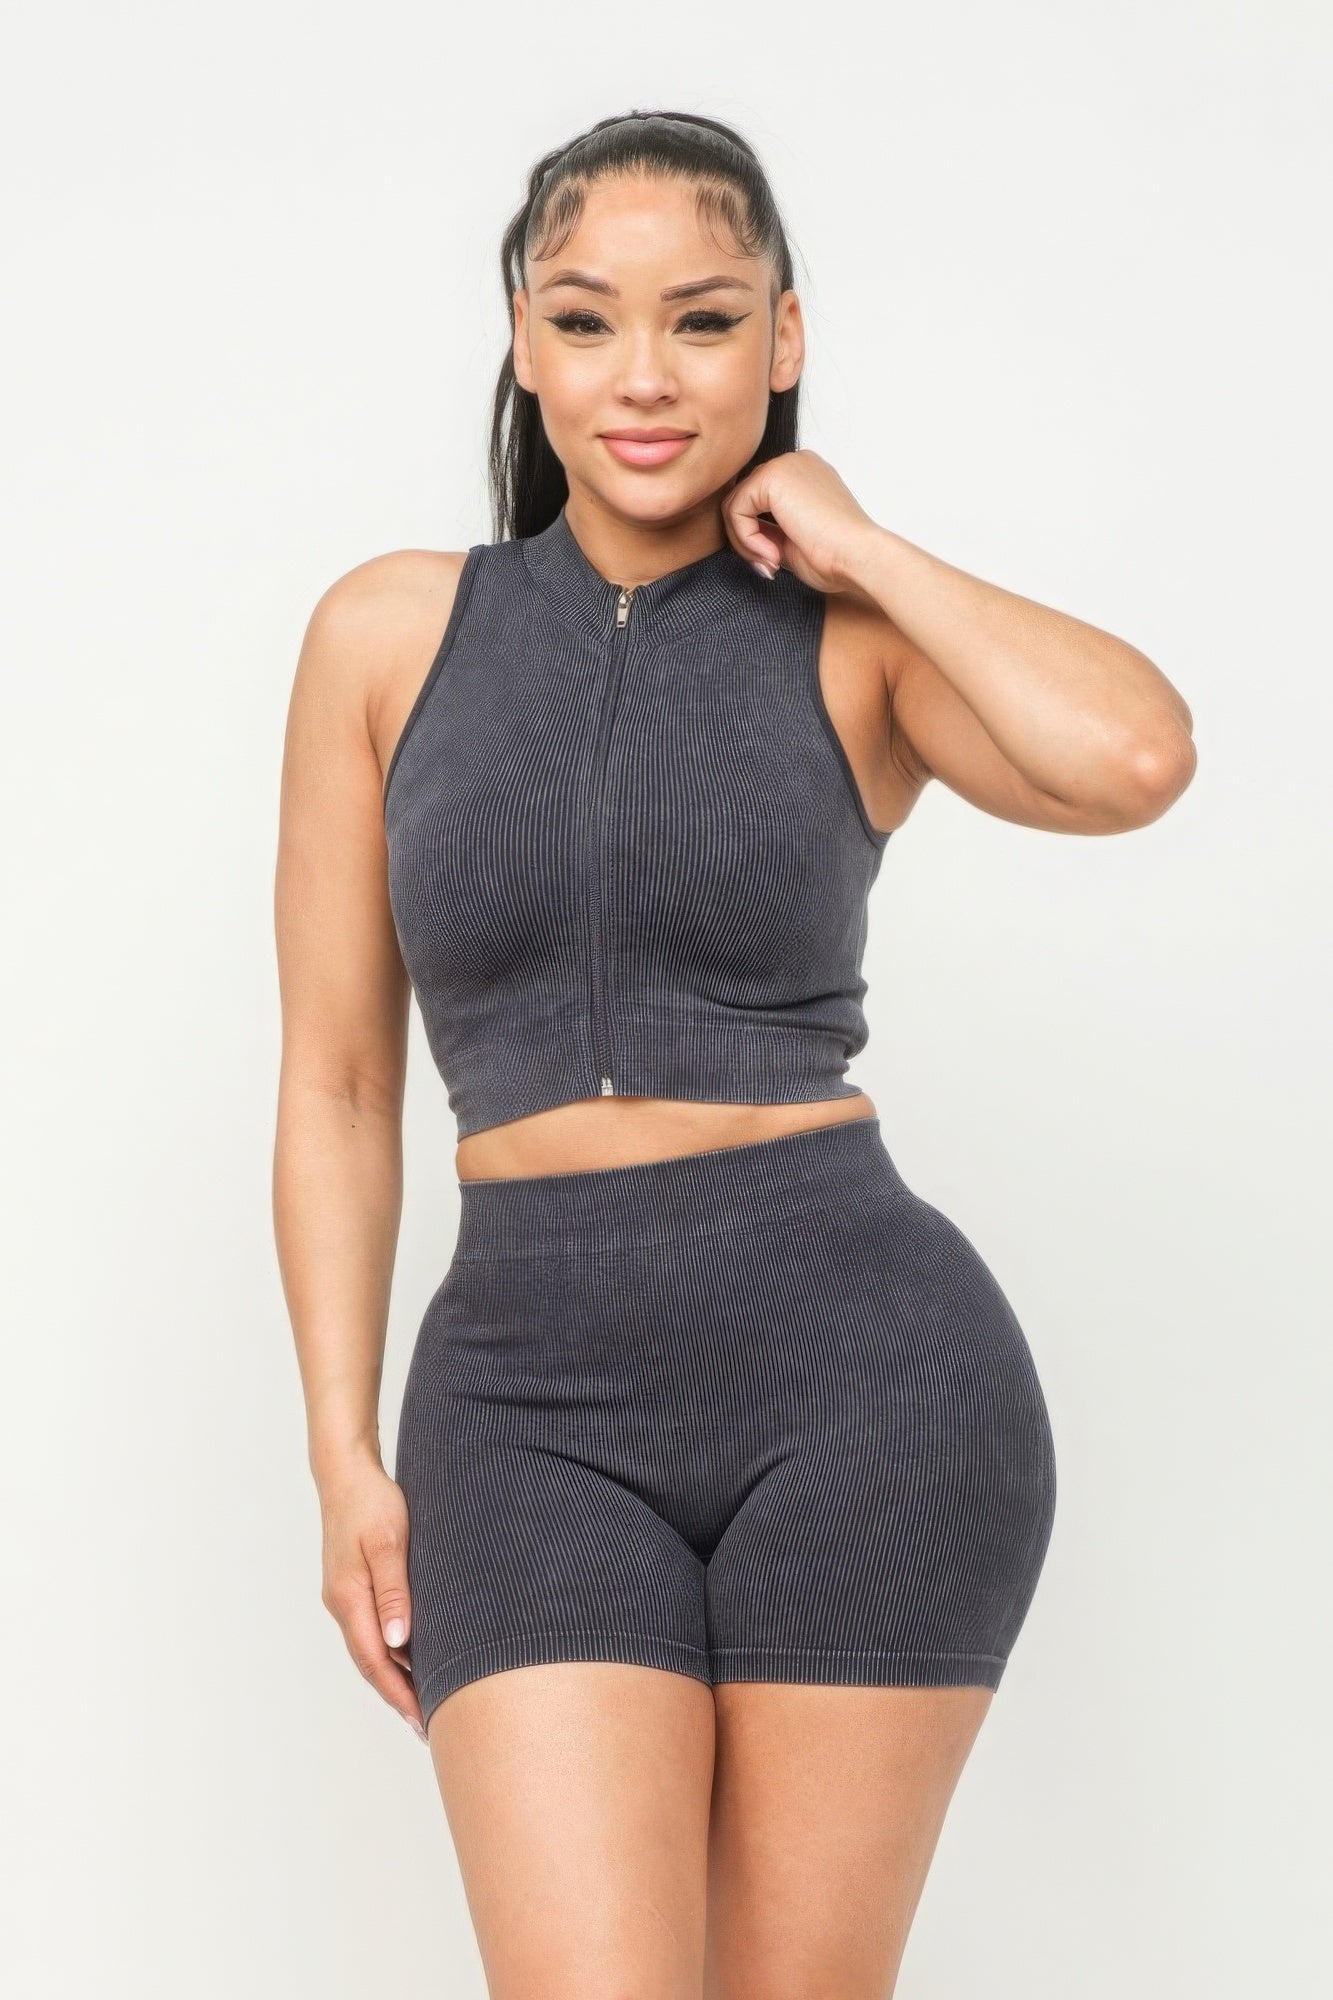 Washed Seamless Zipper Top And Shorts Set | APPAREL, BASICS & ACTIVEWEAR, Black, CCPRODUCTS, Denim, Fuchsia, NEW ARRIVALS, SETS | Bodiied